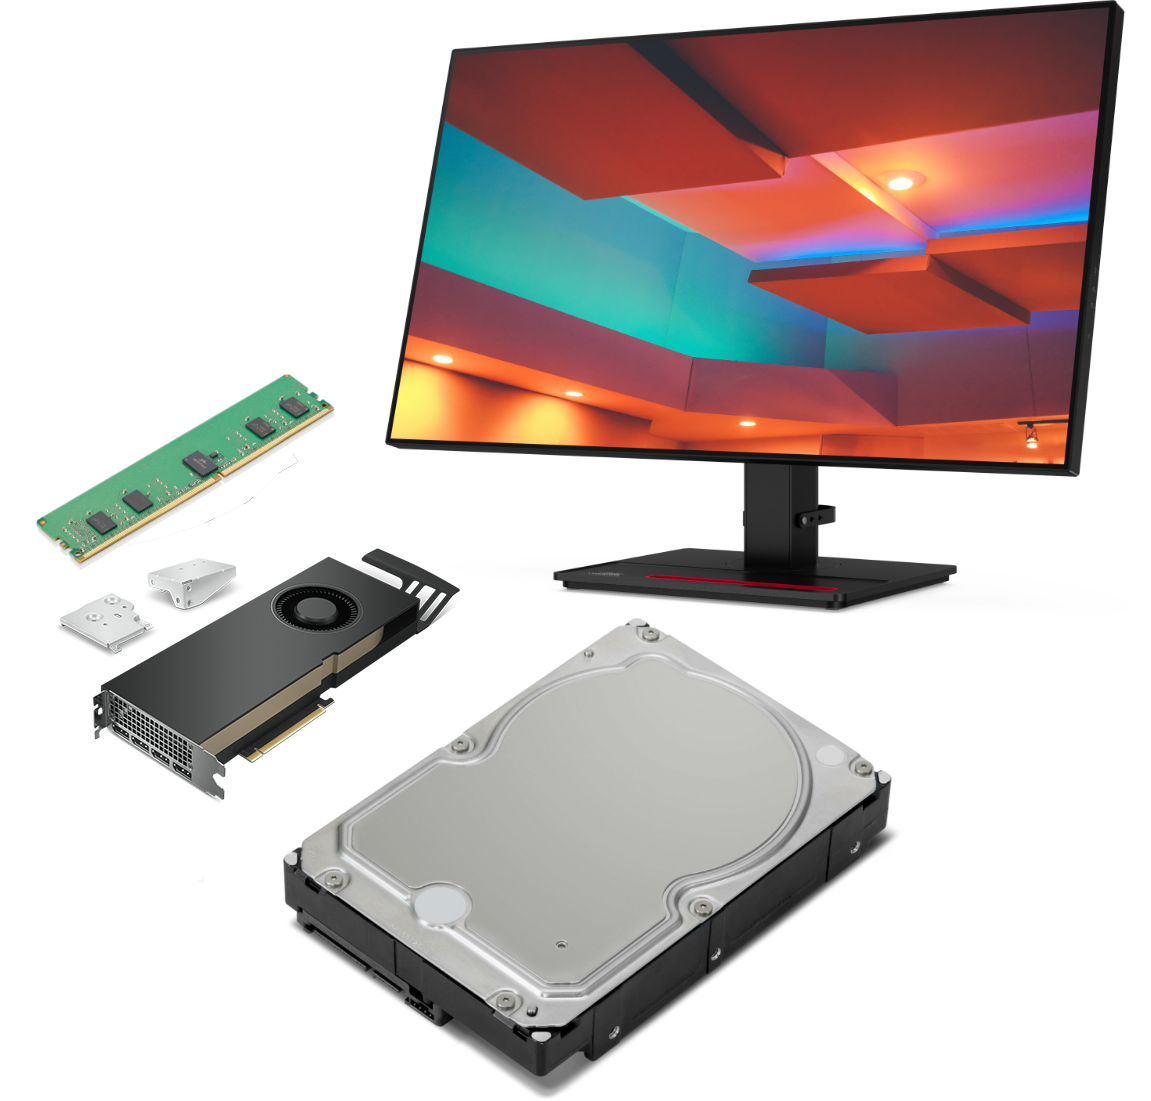 5 accessories compatible with the Lenovo ThinkStation P620 tower workstation including monitor, graphics card.